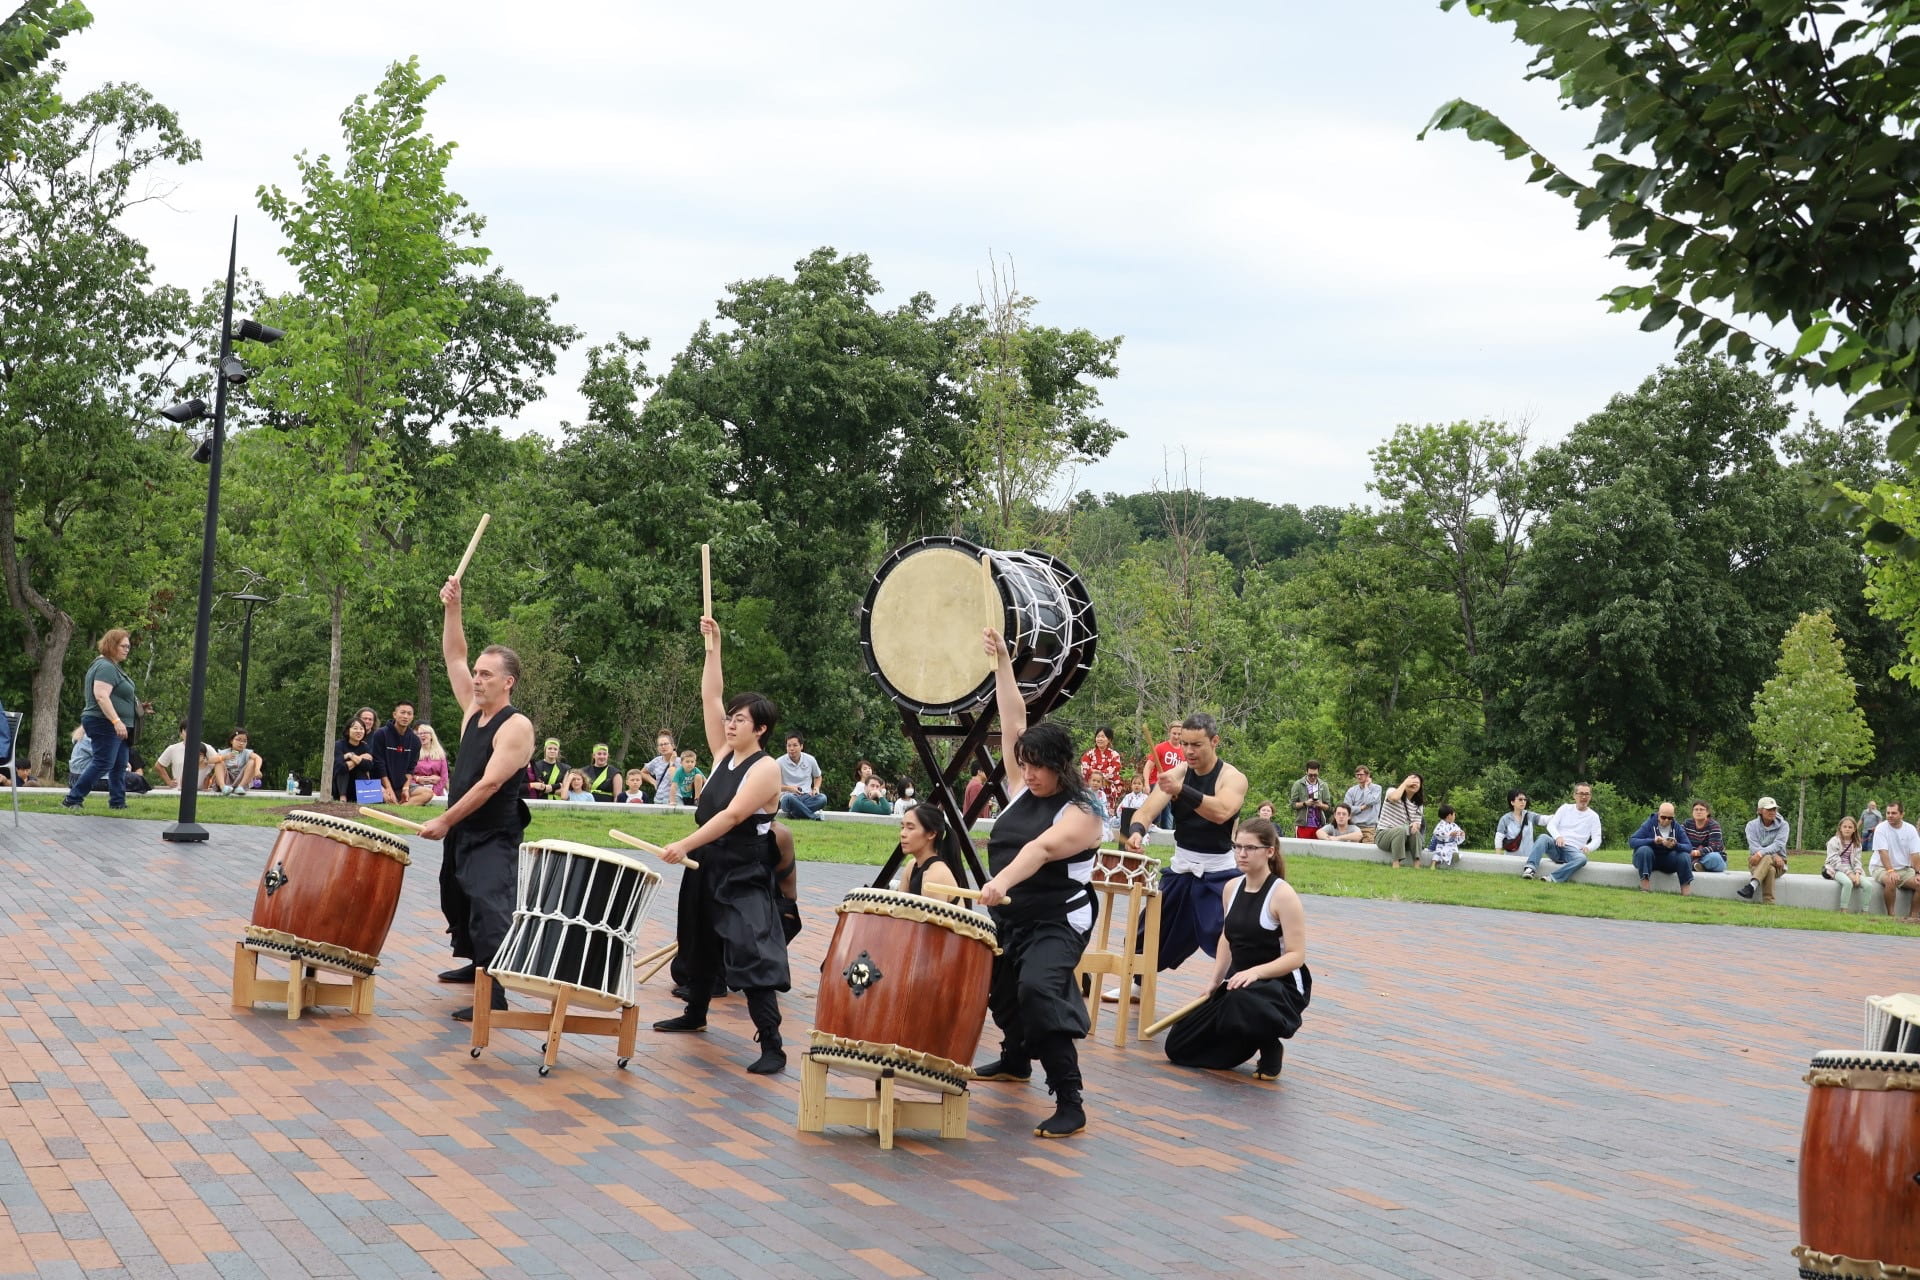 The Wadaiko Gouken Japanese Drum Troupe --- based in southwest Ohio --- will be attending JASCO's Obon Festival this year to perform Taiko, a Japanese style of drumming. Credit: Preeti Manchanda